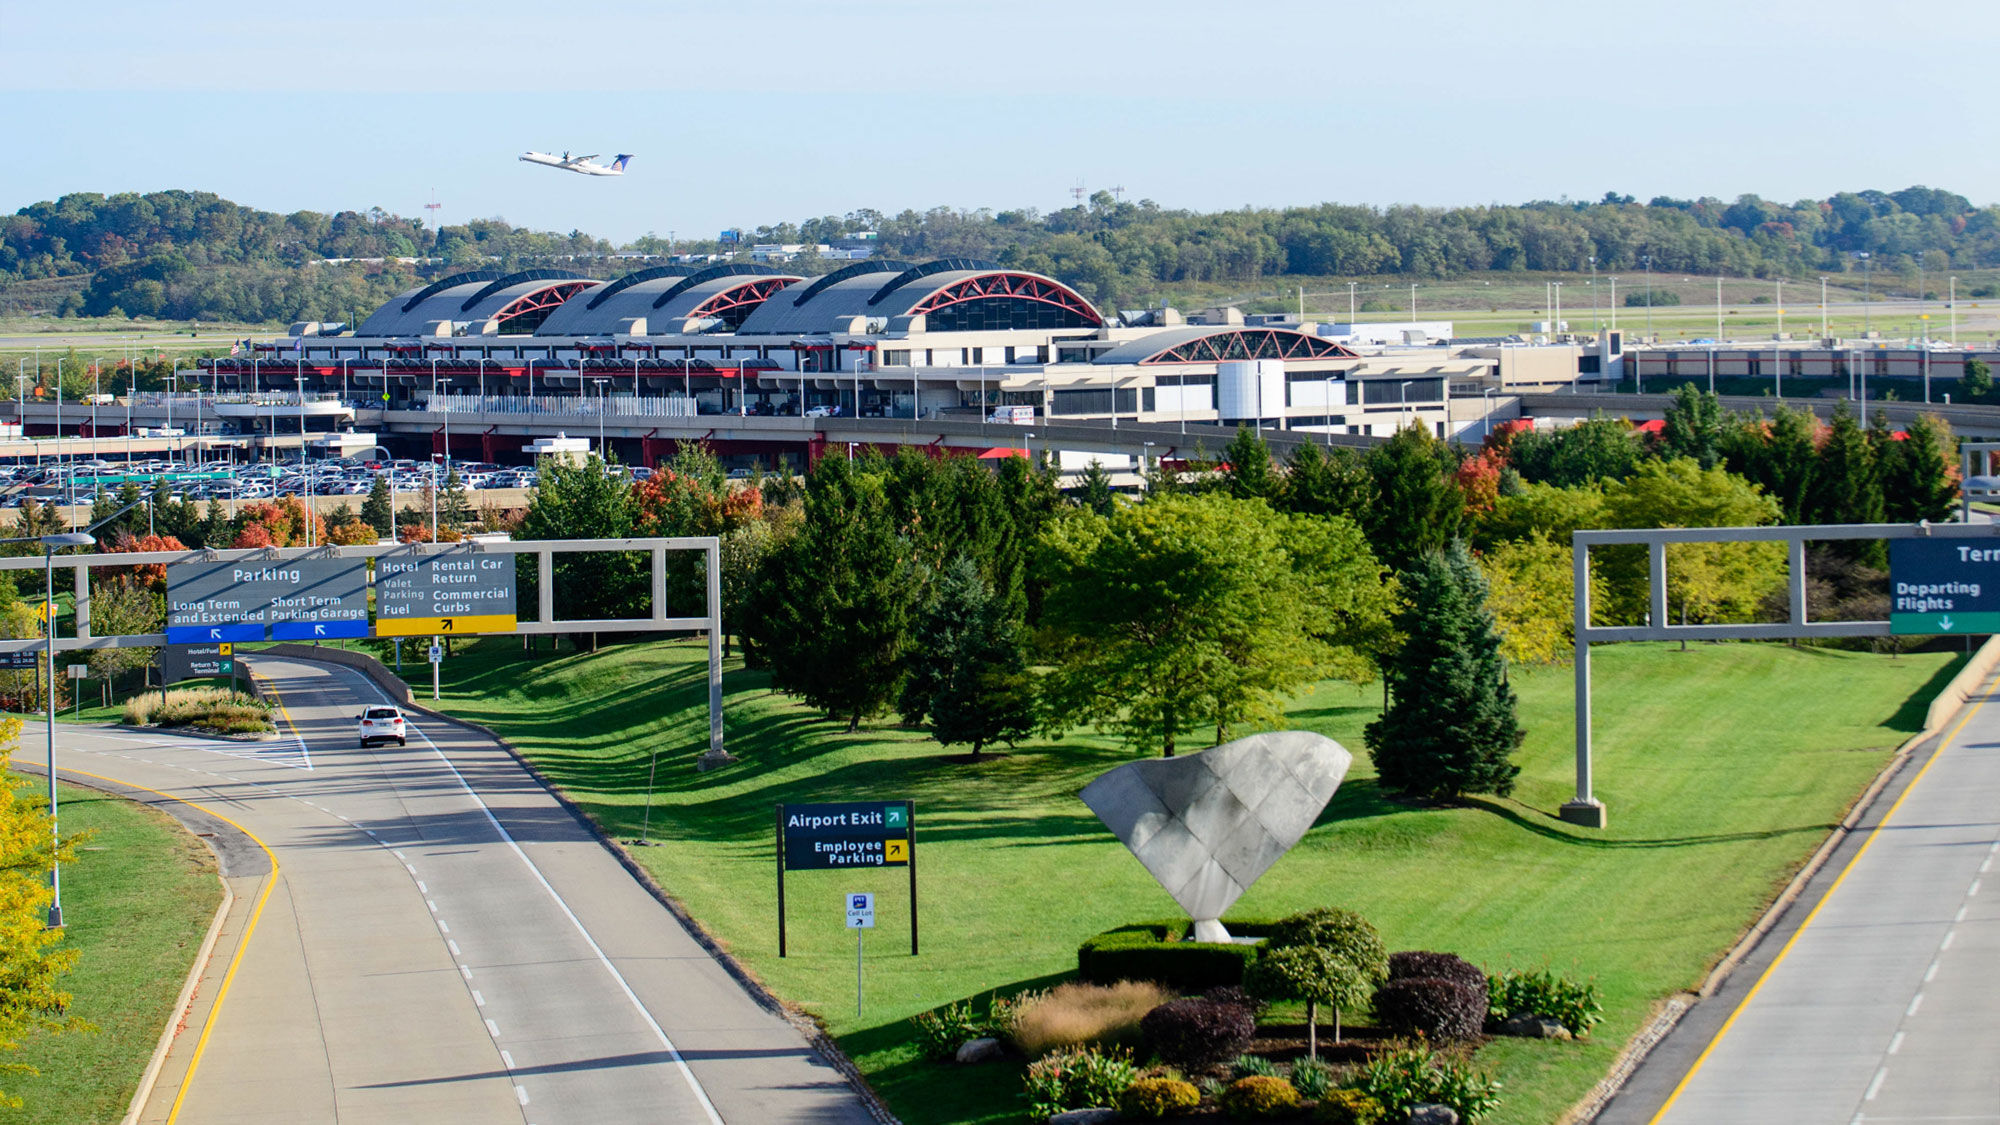 Pittsburgh's airport is looking into producing sustainable